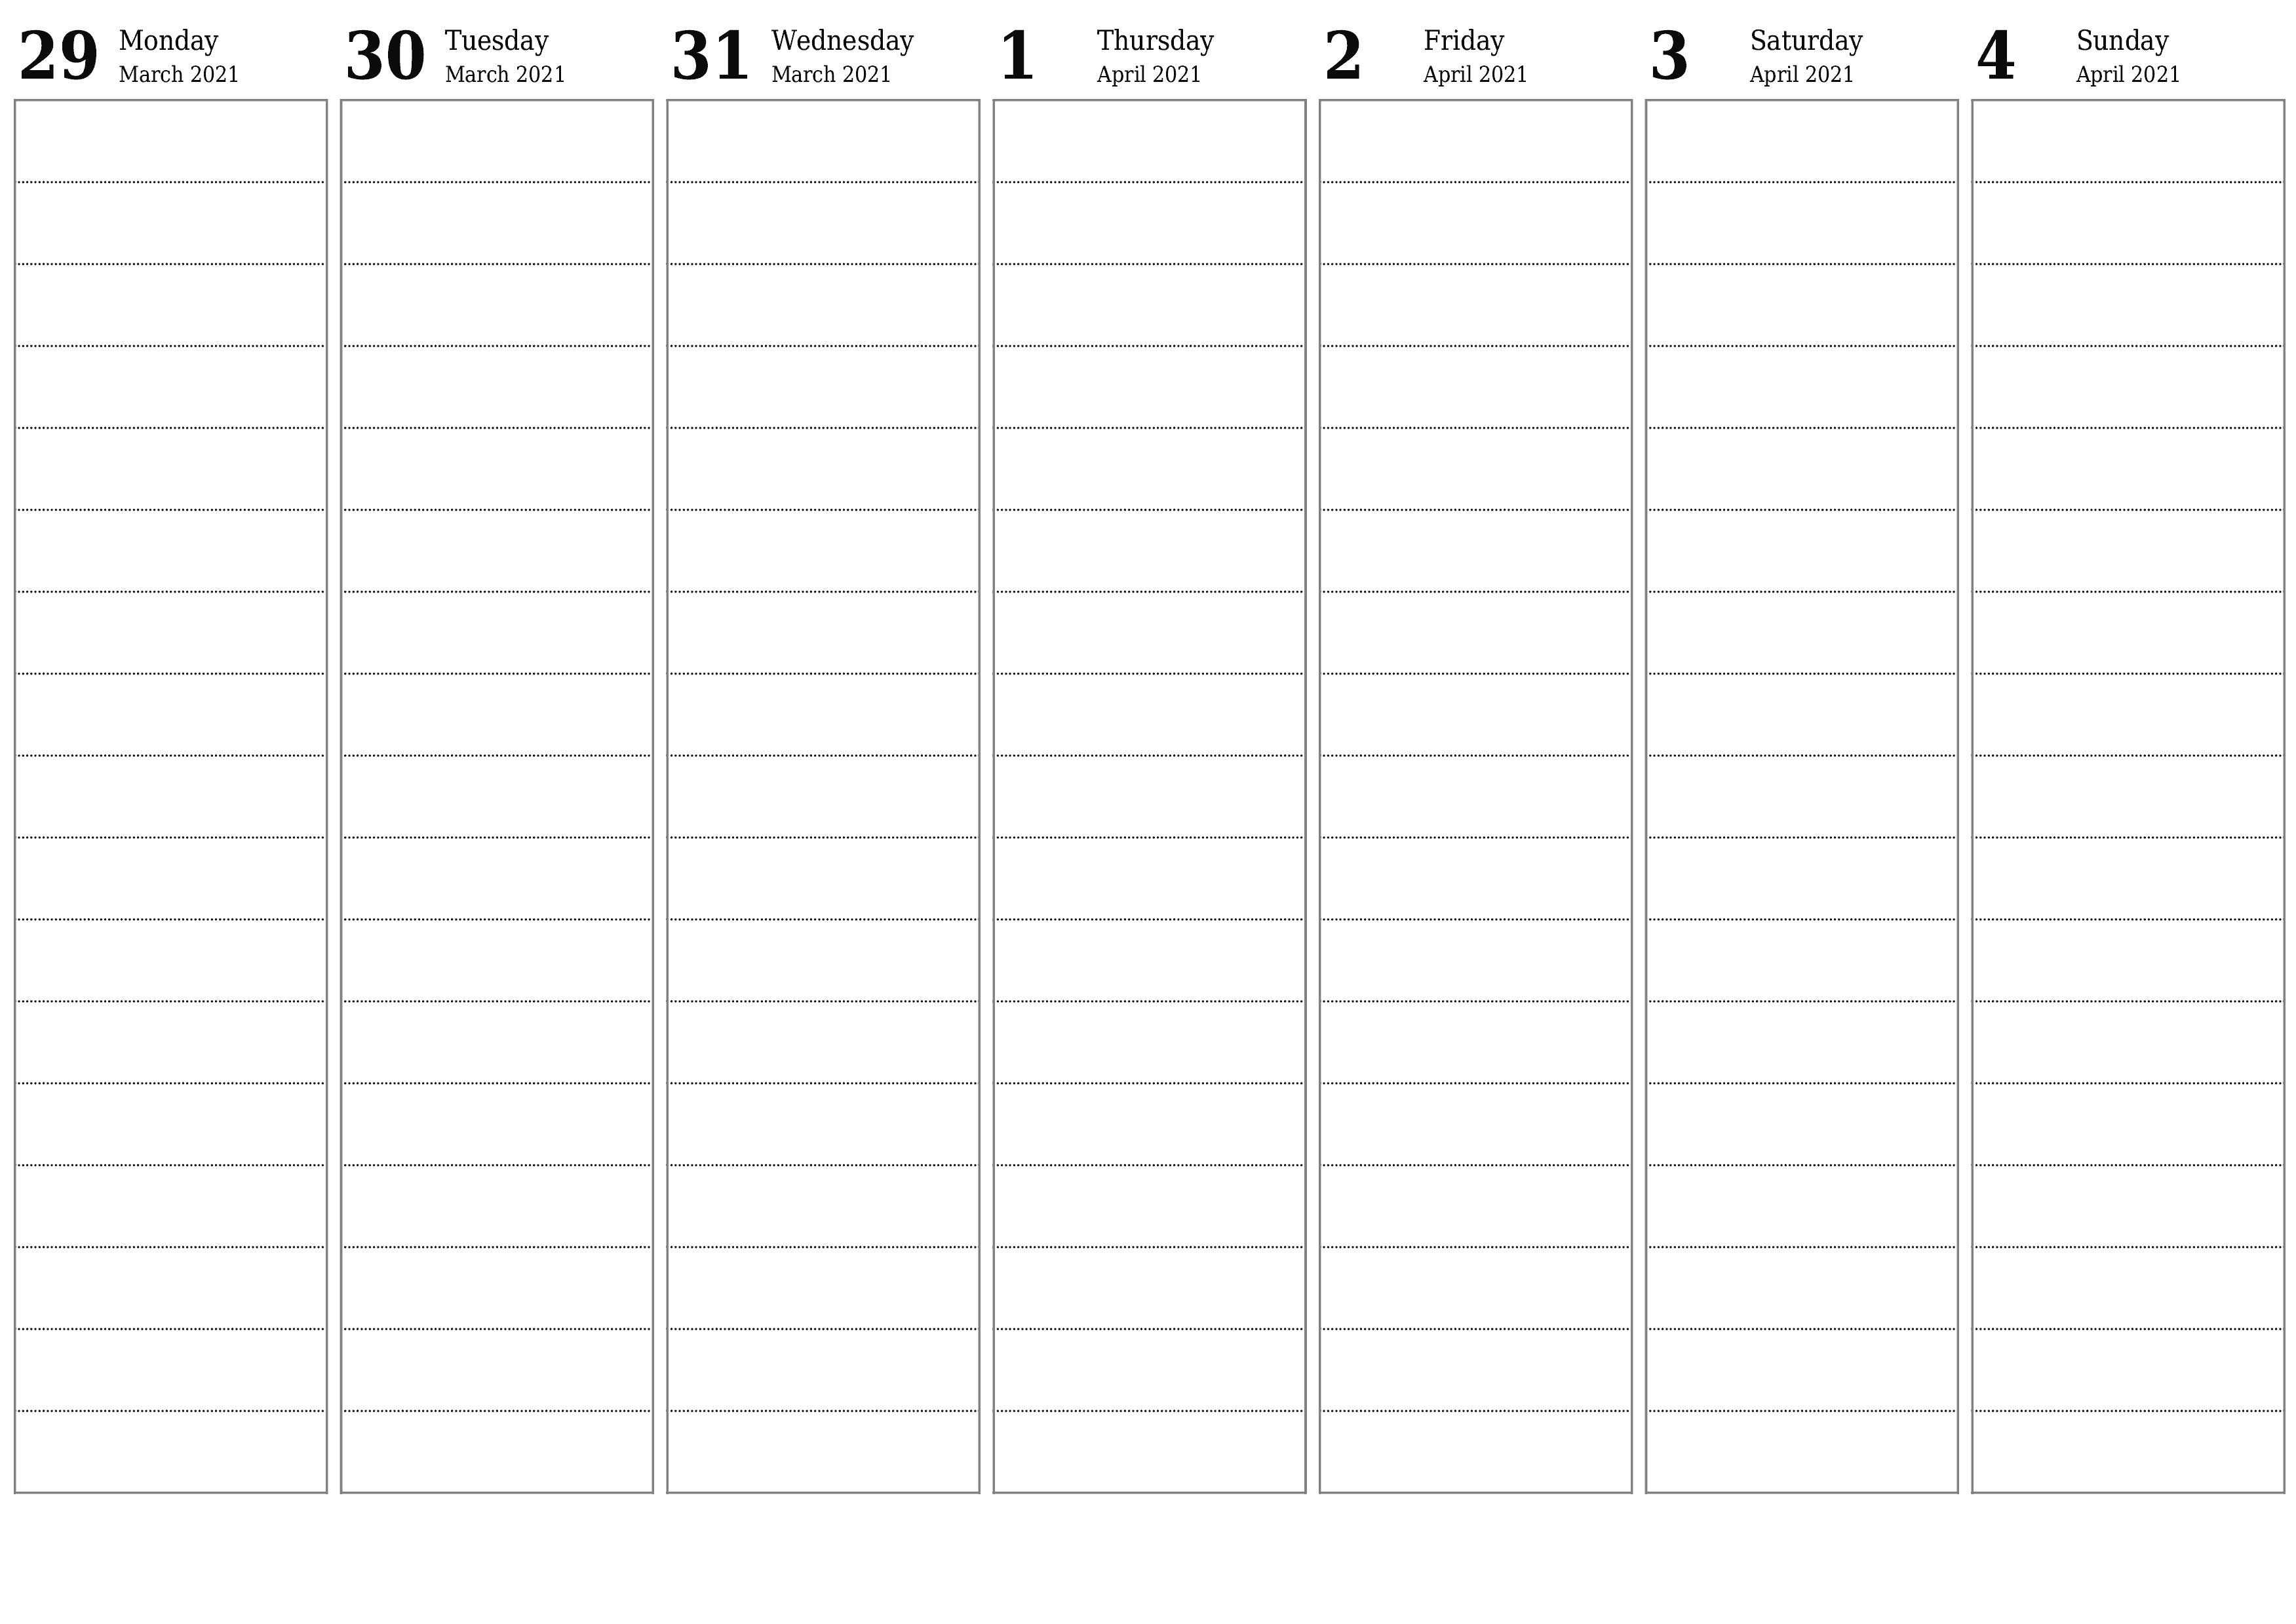 Blank weekly printable calendar and planner for week April 2021 with notes, save and print to PDF PNG English